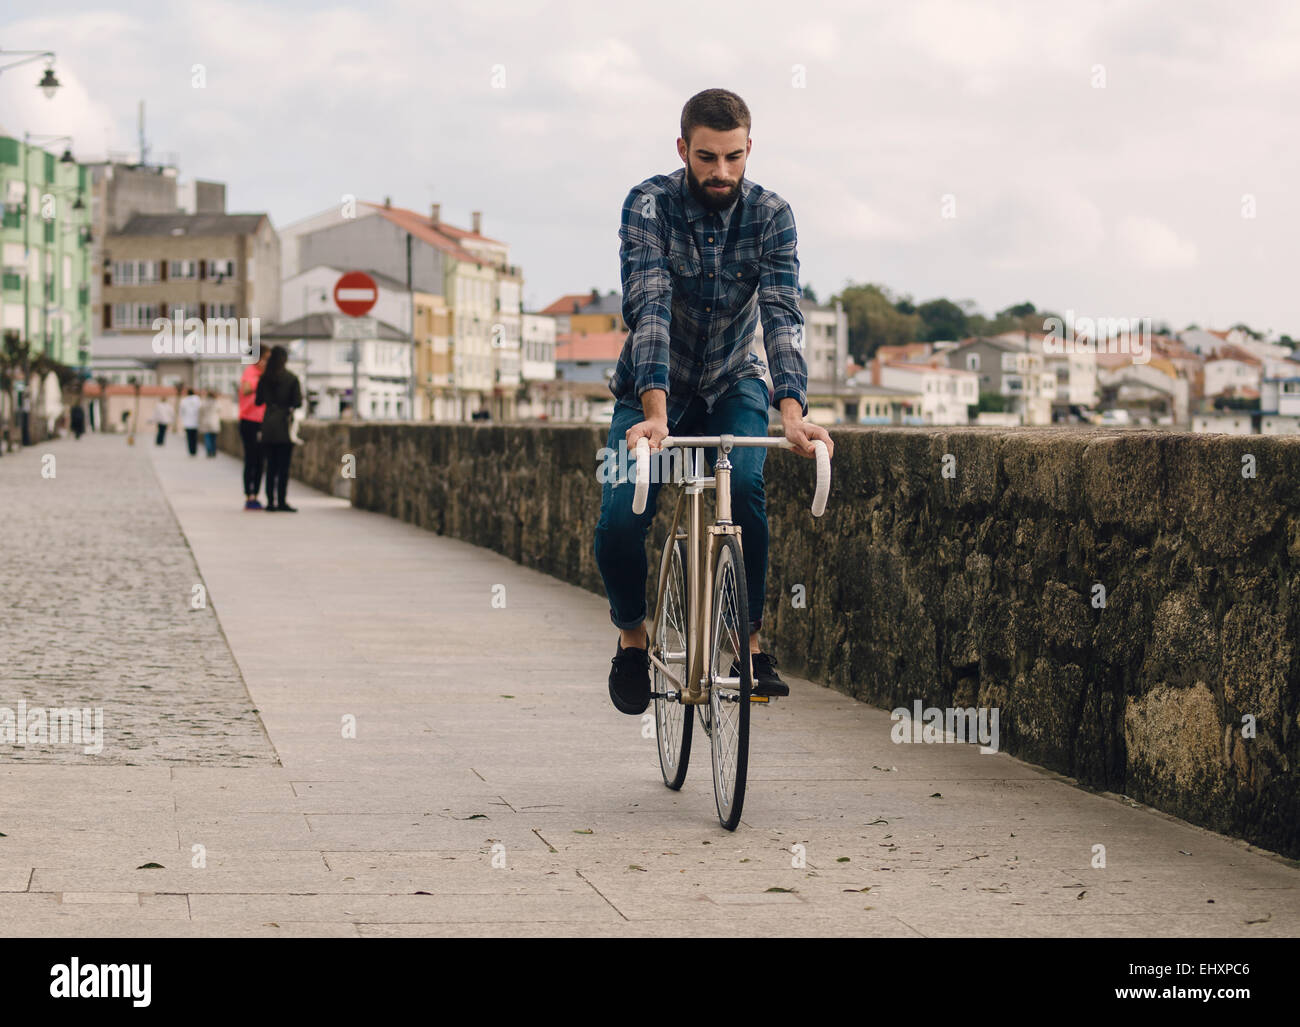 Spain, Galicia, Ares, hipster man riding with a fixie bike Stock Photo